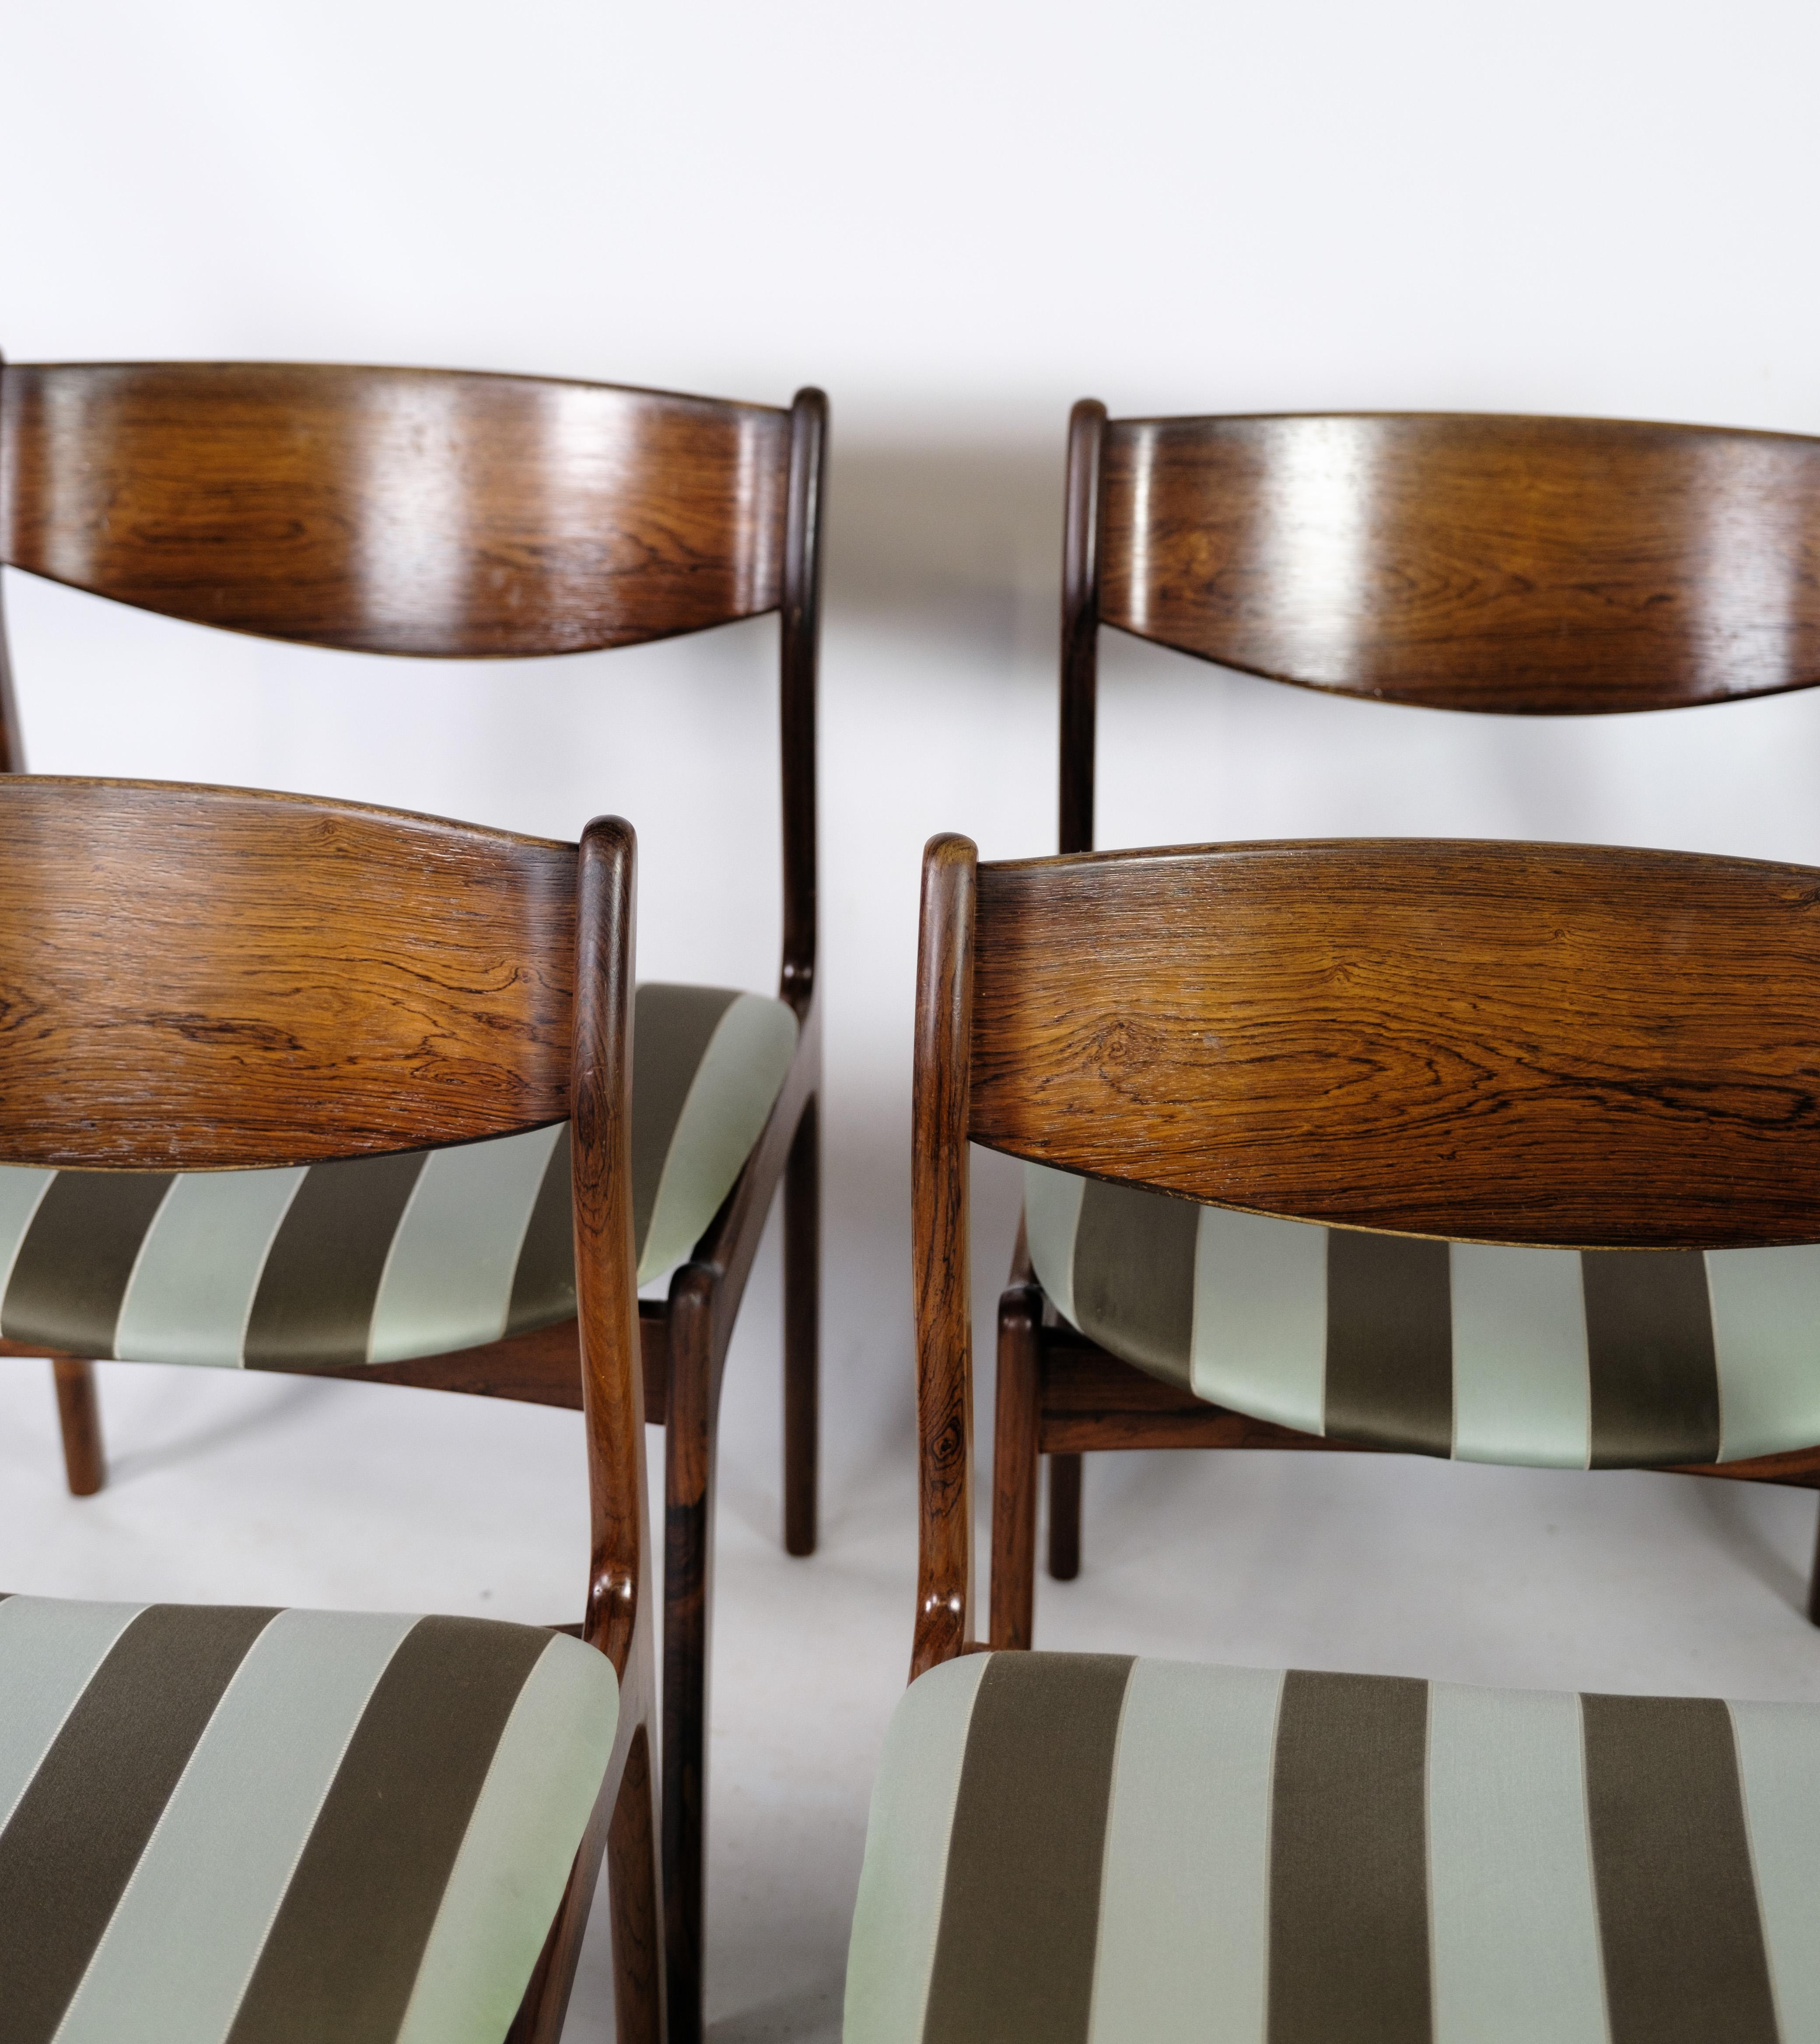 This set of six dining chairs, crafted from rosewood and designed in the Danish style, hails from around the 1960s and is manufactured by Farsø møbelfabrik. These chairs are a testament to the timeless allure of mid-century Danish design.

In very